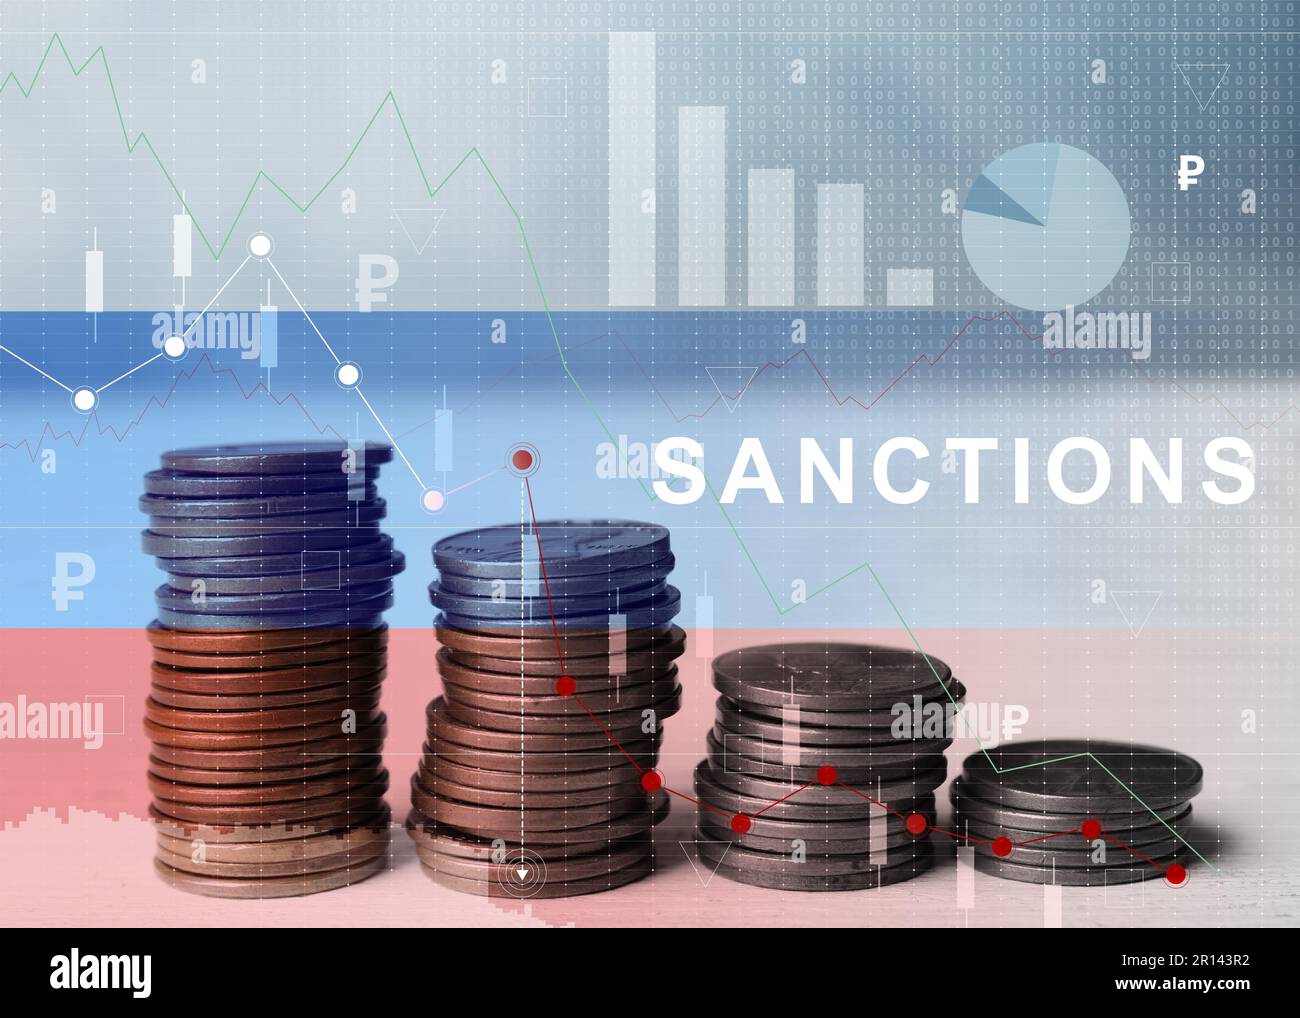 Economic sanctions against Russia because of invasion in Ukraine. Stacked coins on table, illustration of decline graph and Russian flag Stock Photo